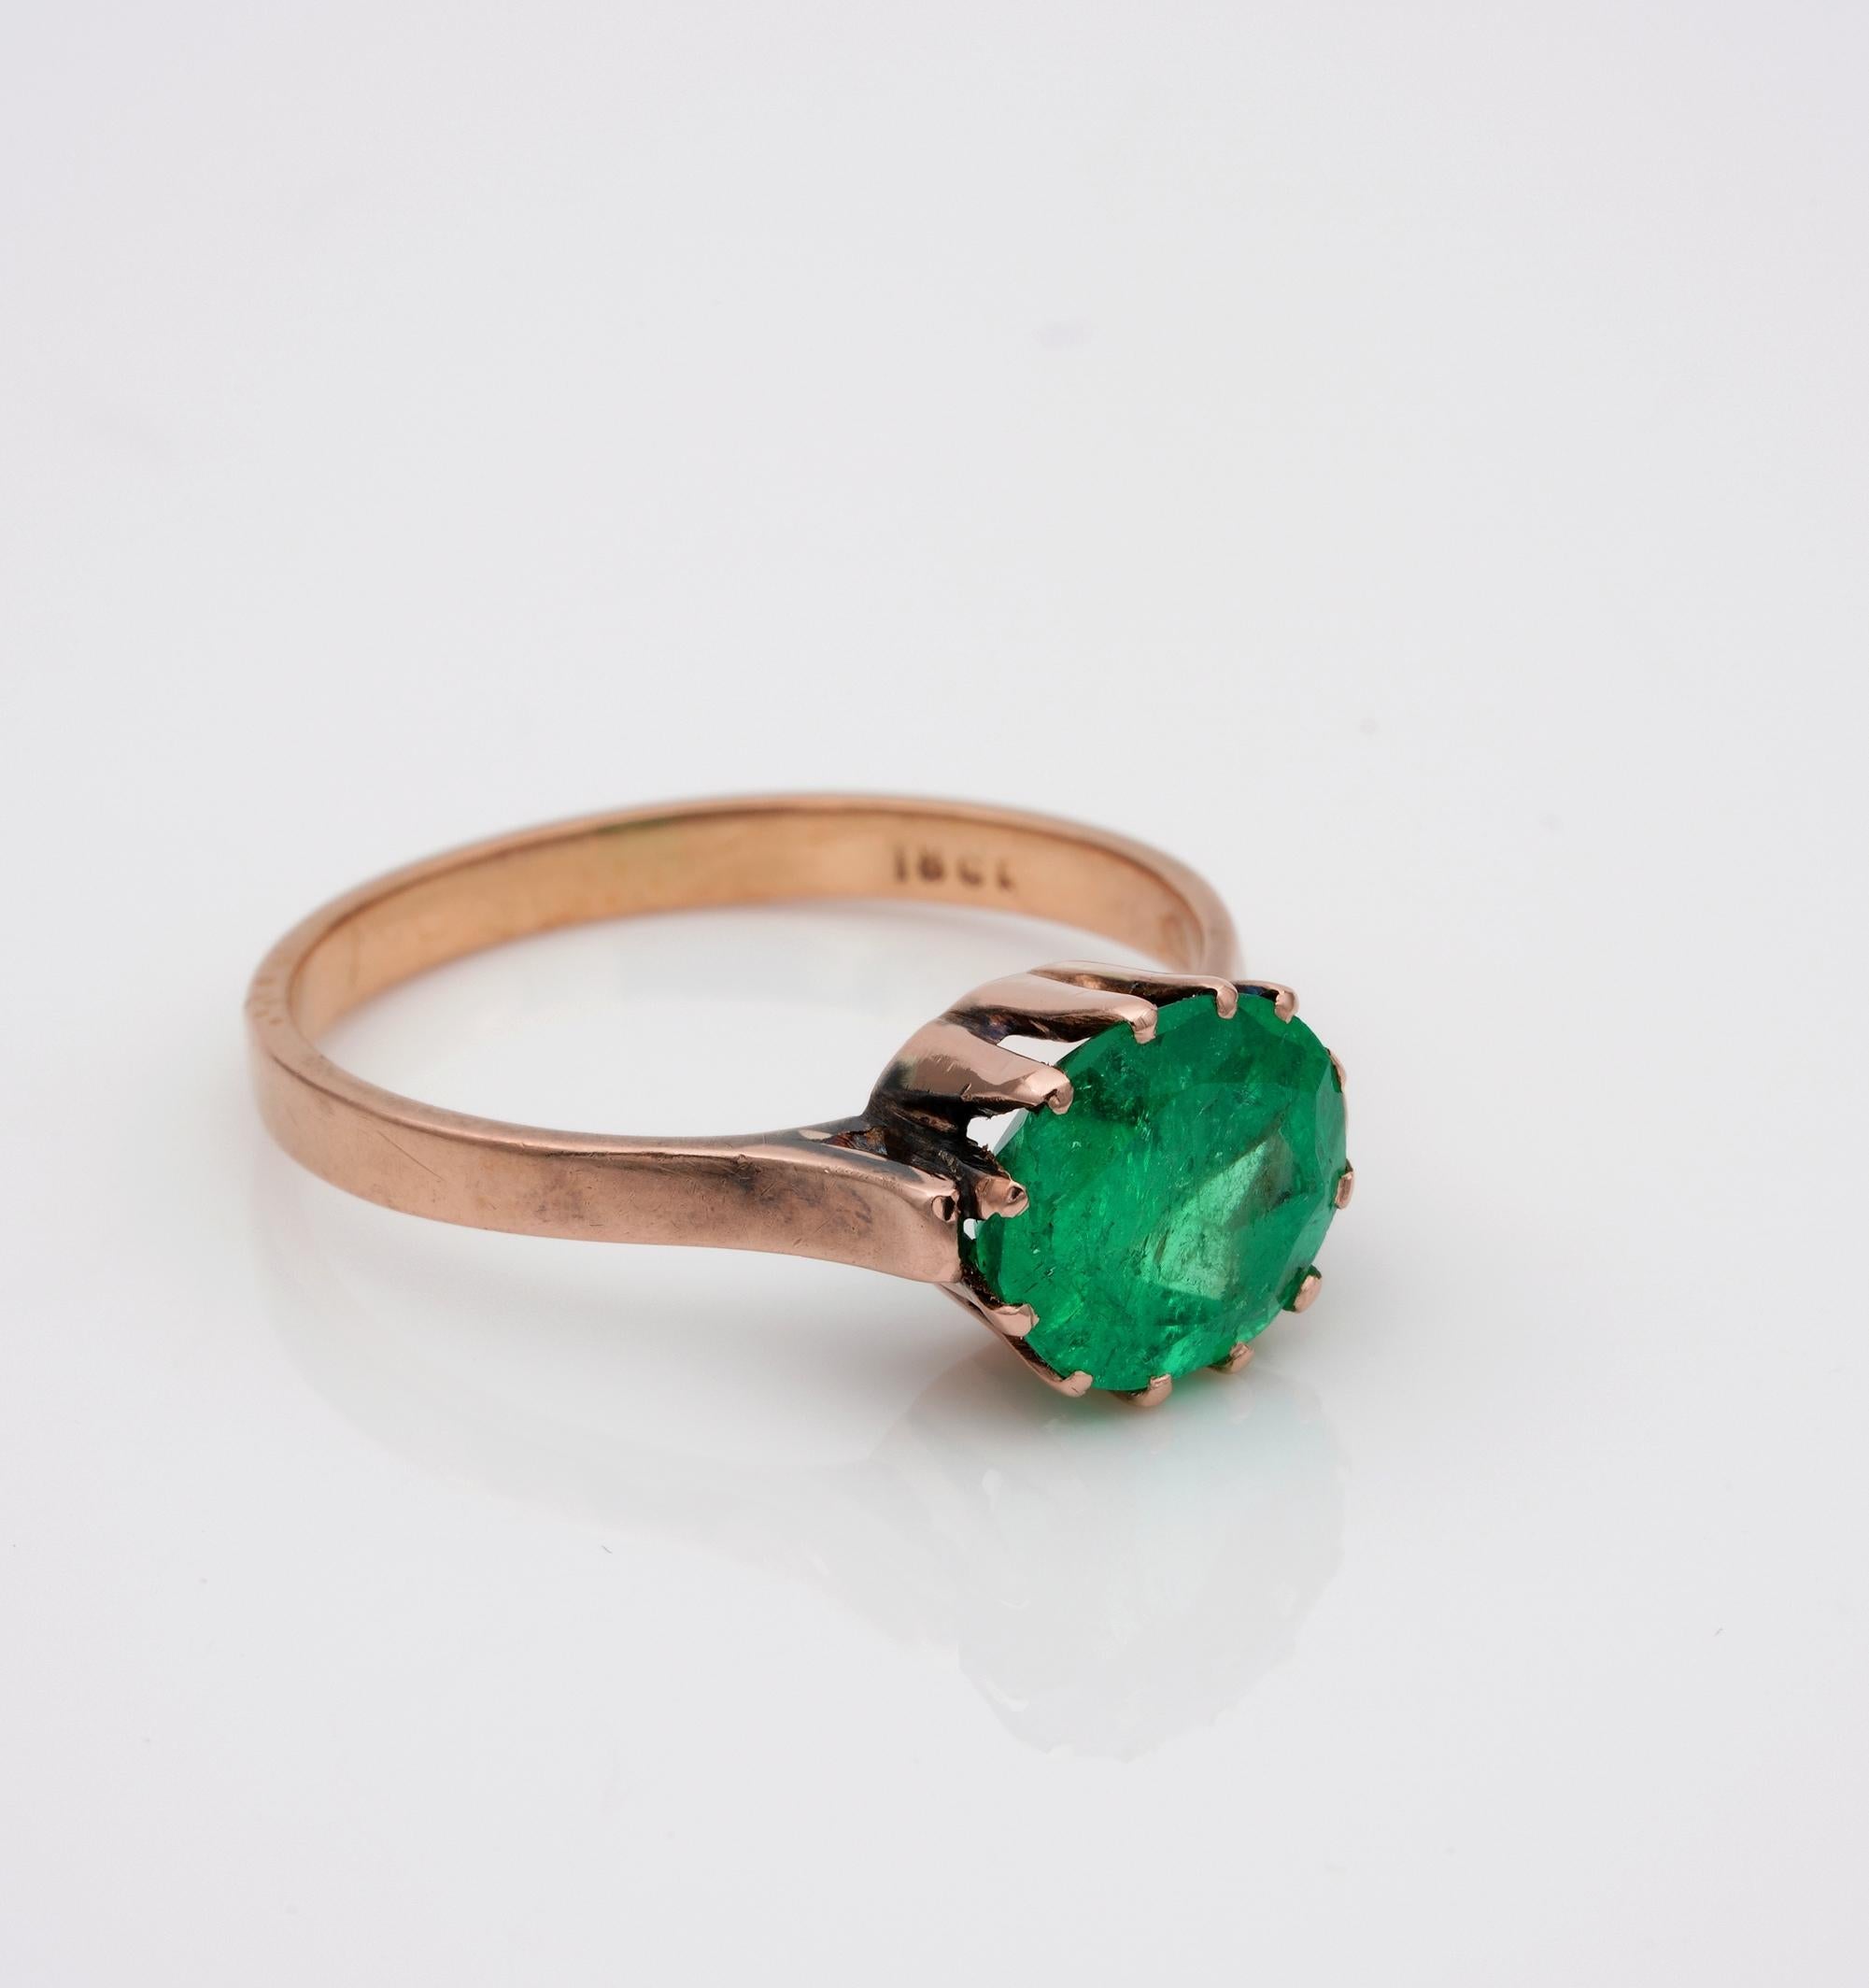 Oval Cut Victorian Rare 1.85 Carat Colombian Emerald Solitaire Ring 18 Karat Rose Gold For Sale